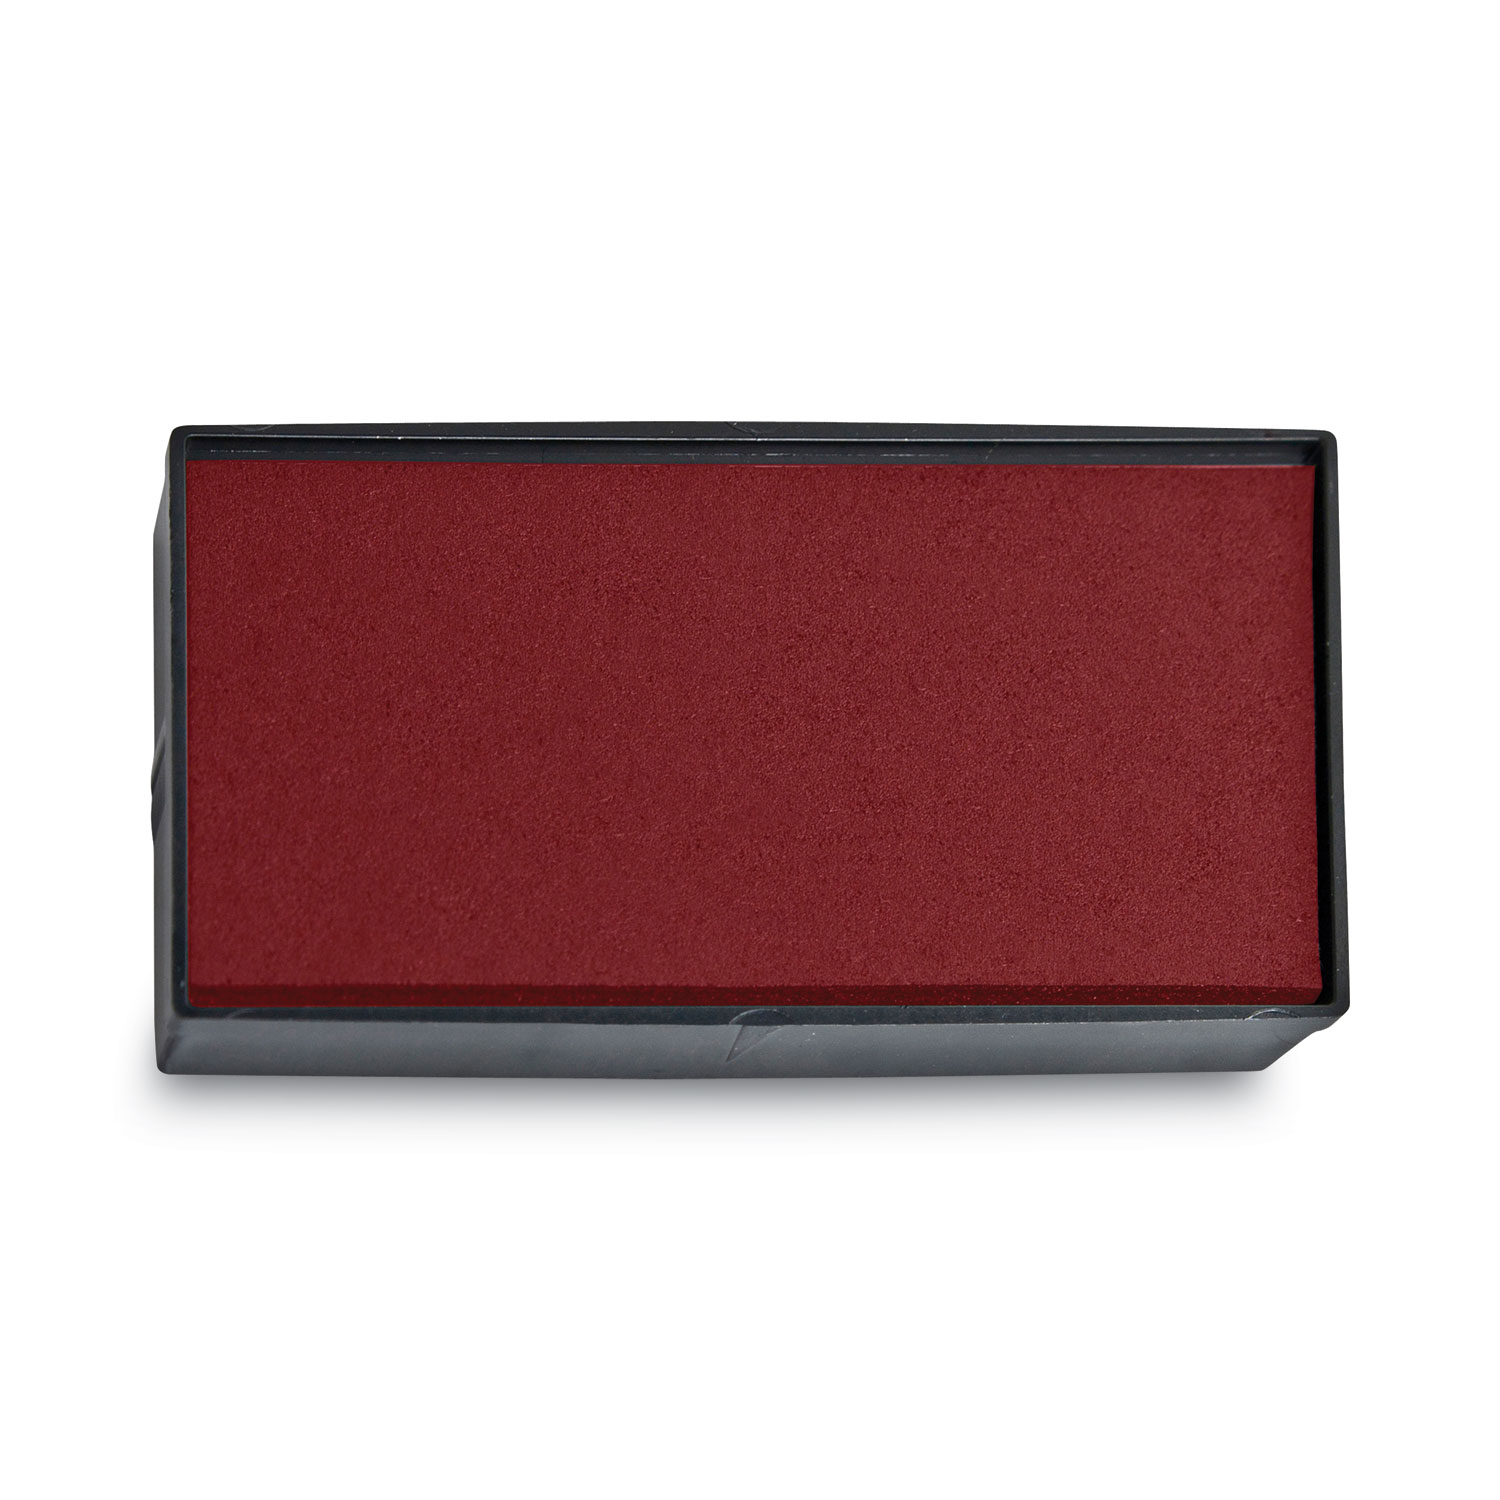 Replacement Ink Pad for 2000PLUS 1SI60P, 3.13 x 0.25, Red - Zerbee